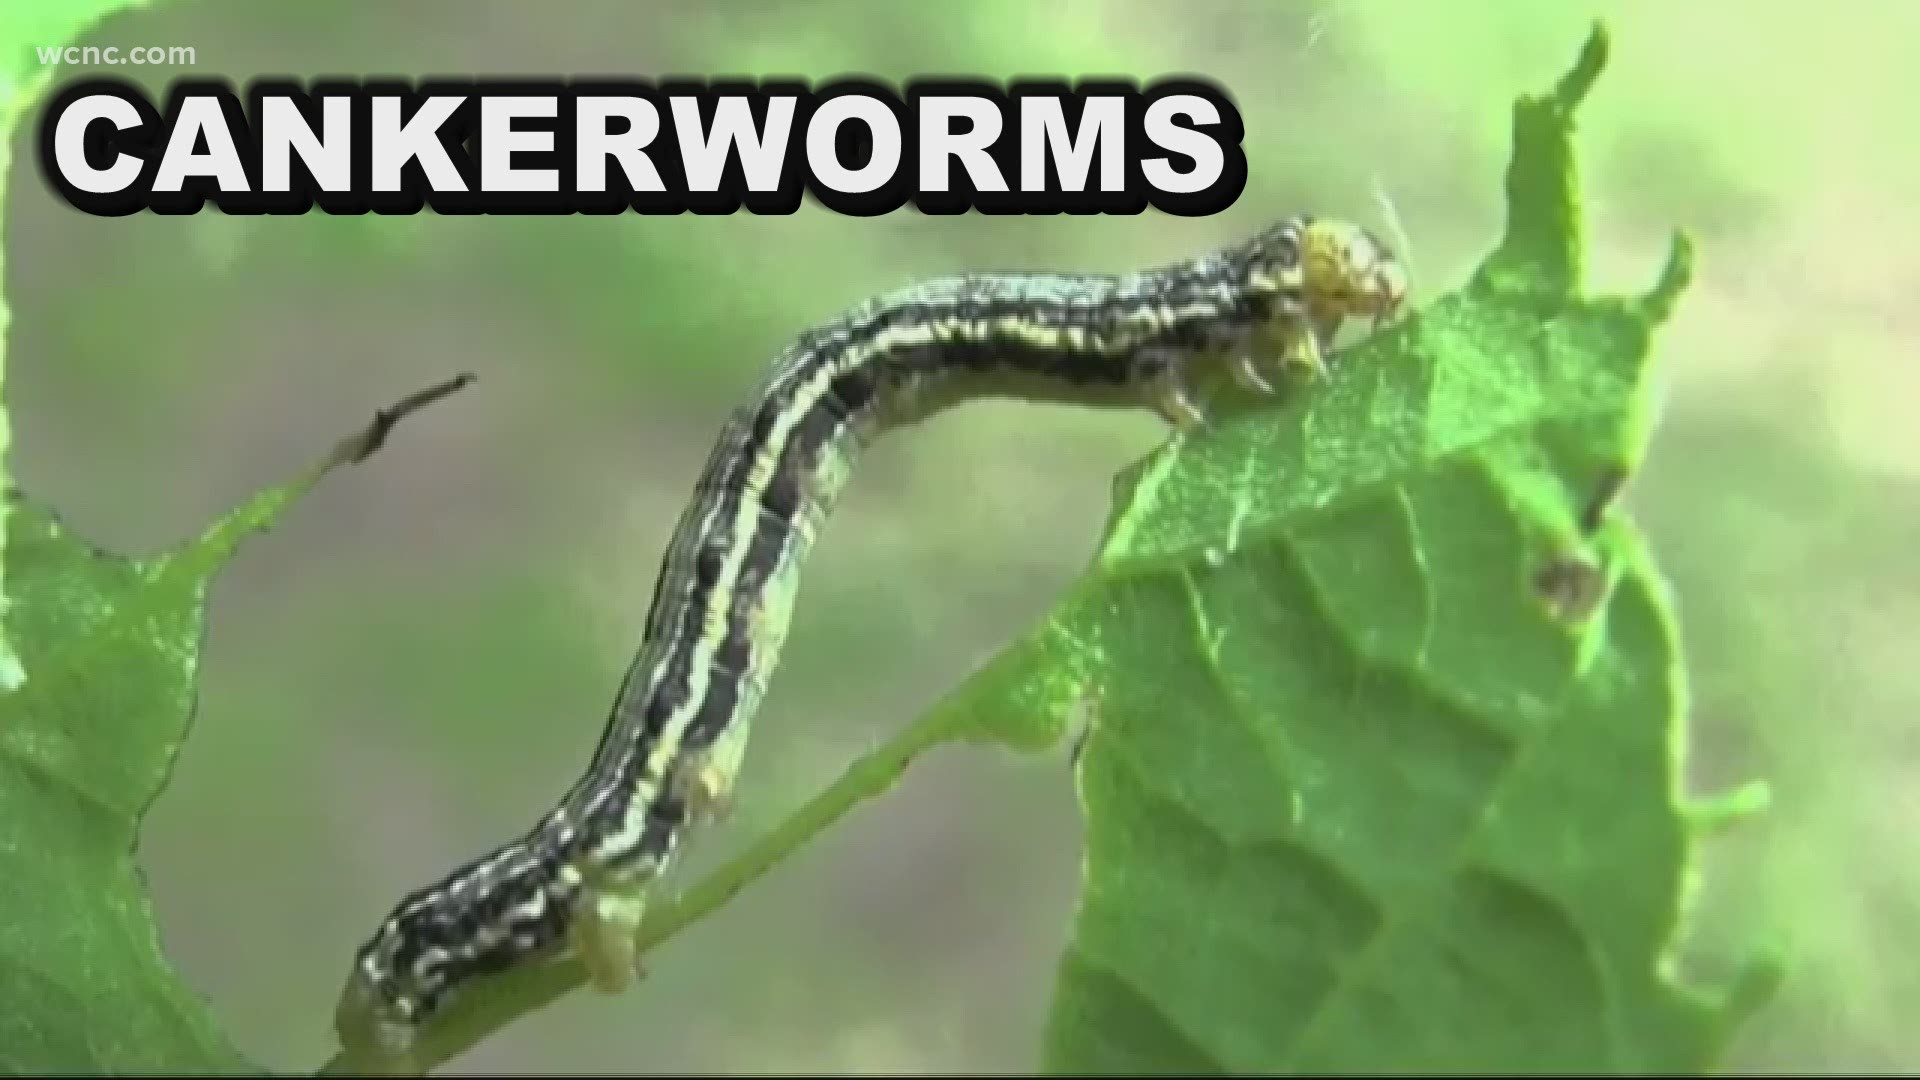 Cankerworms population is low this year in Charlotte so we will not be banding our trees this year.